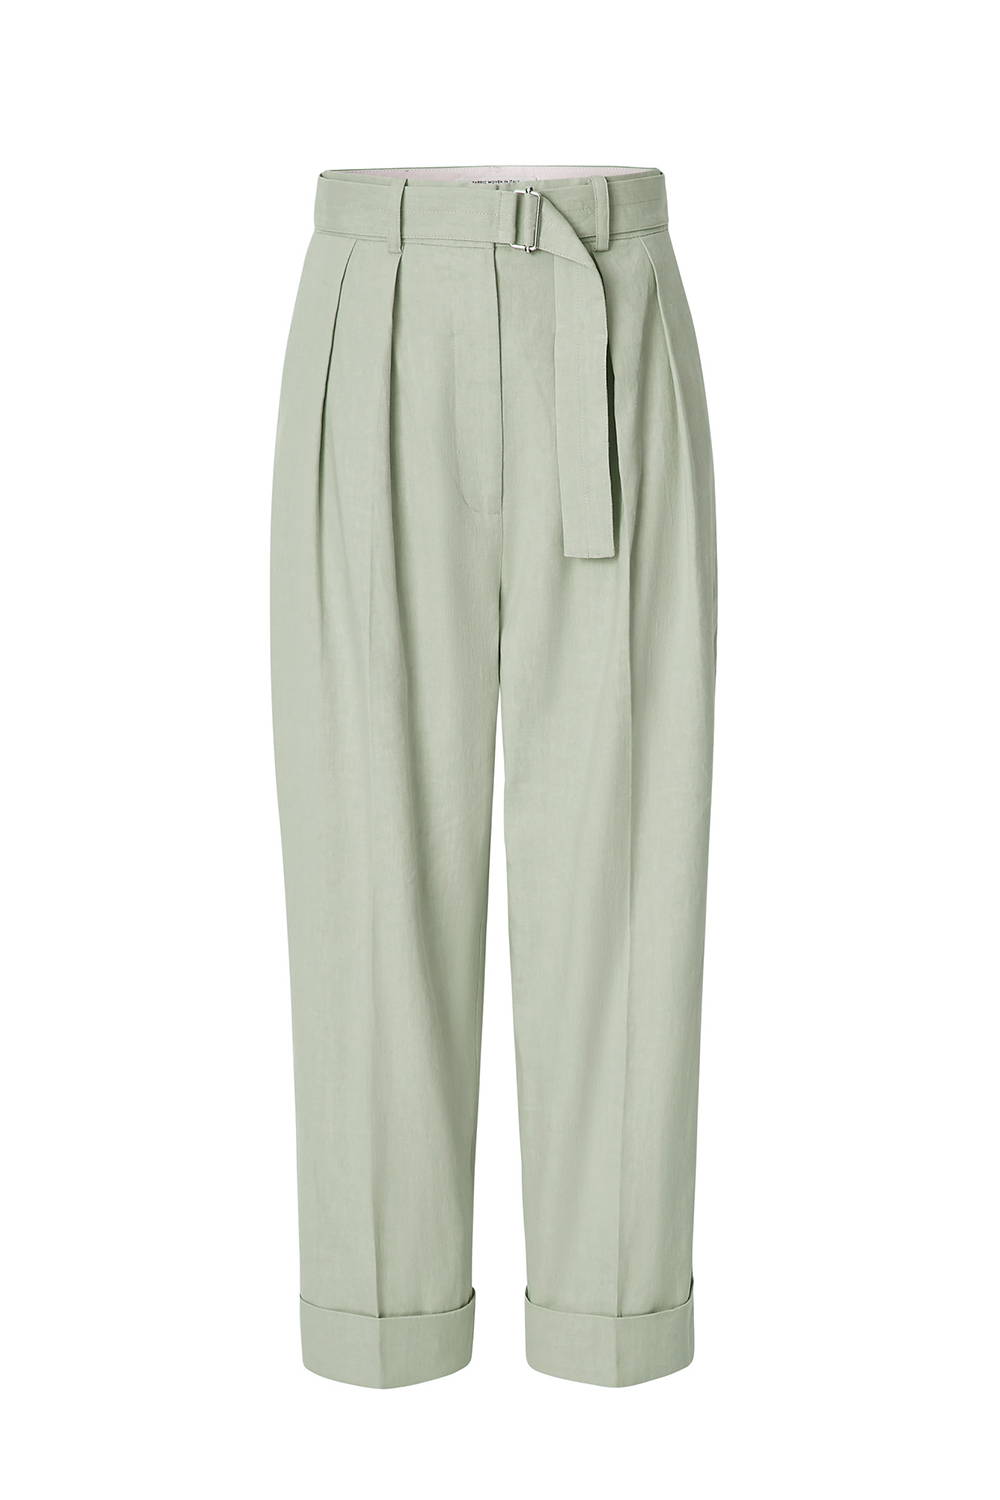 Oroton Belted Pant